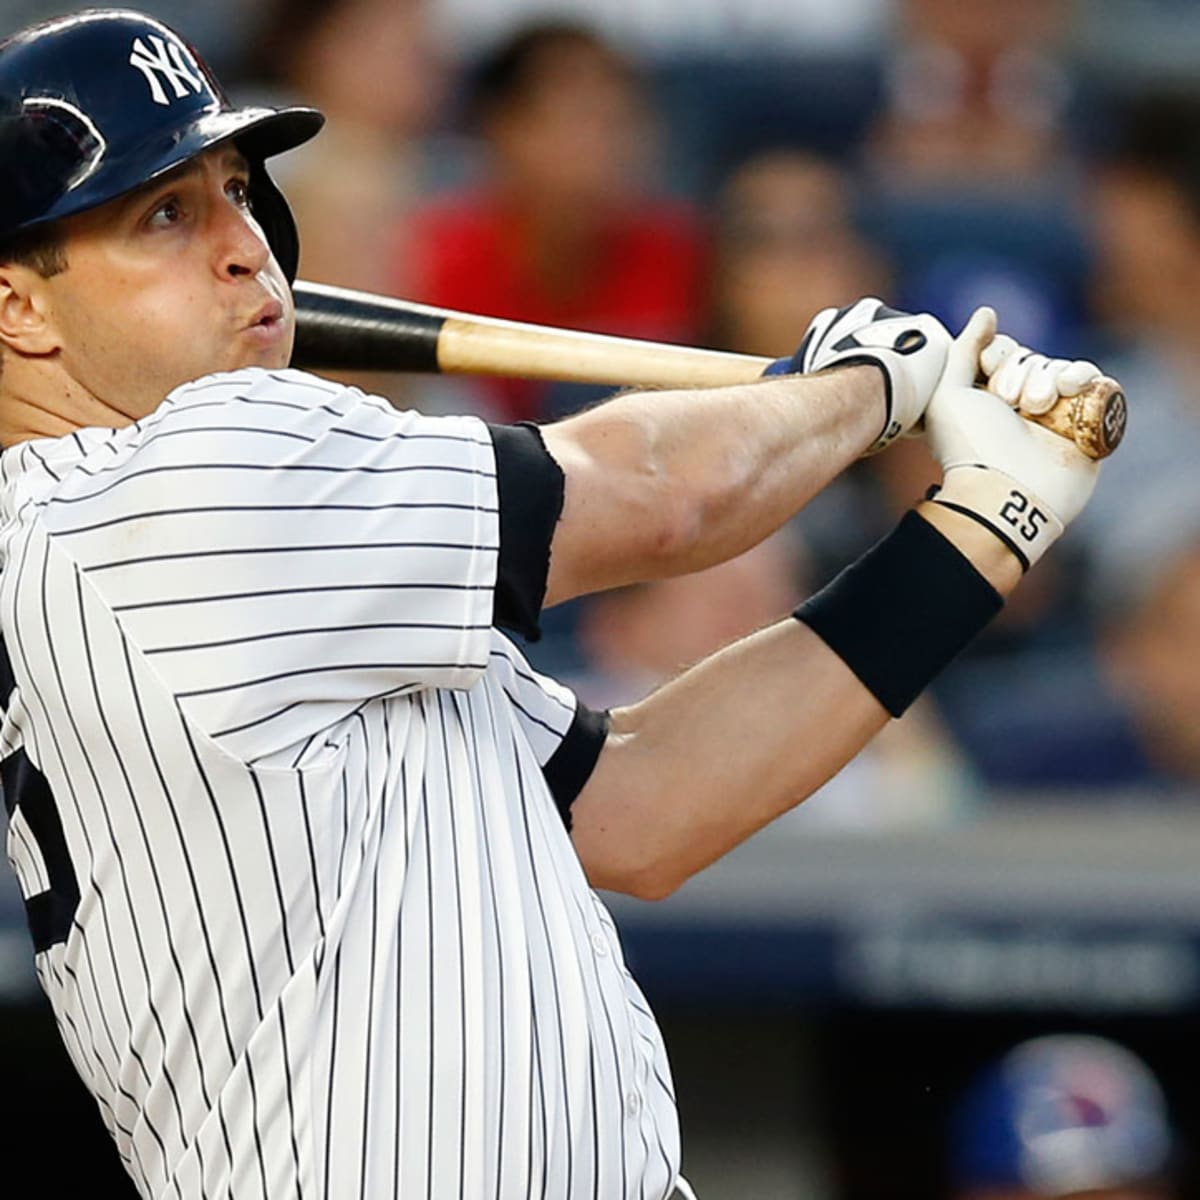 Yankees sign three-time All-Star slugger amid slew of injuries